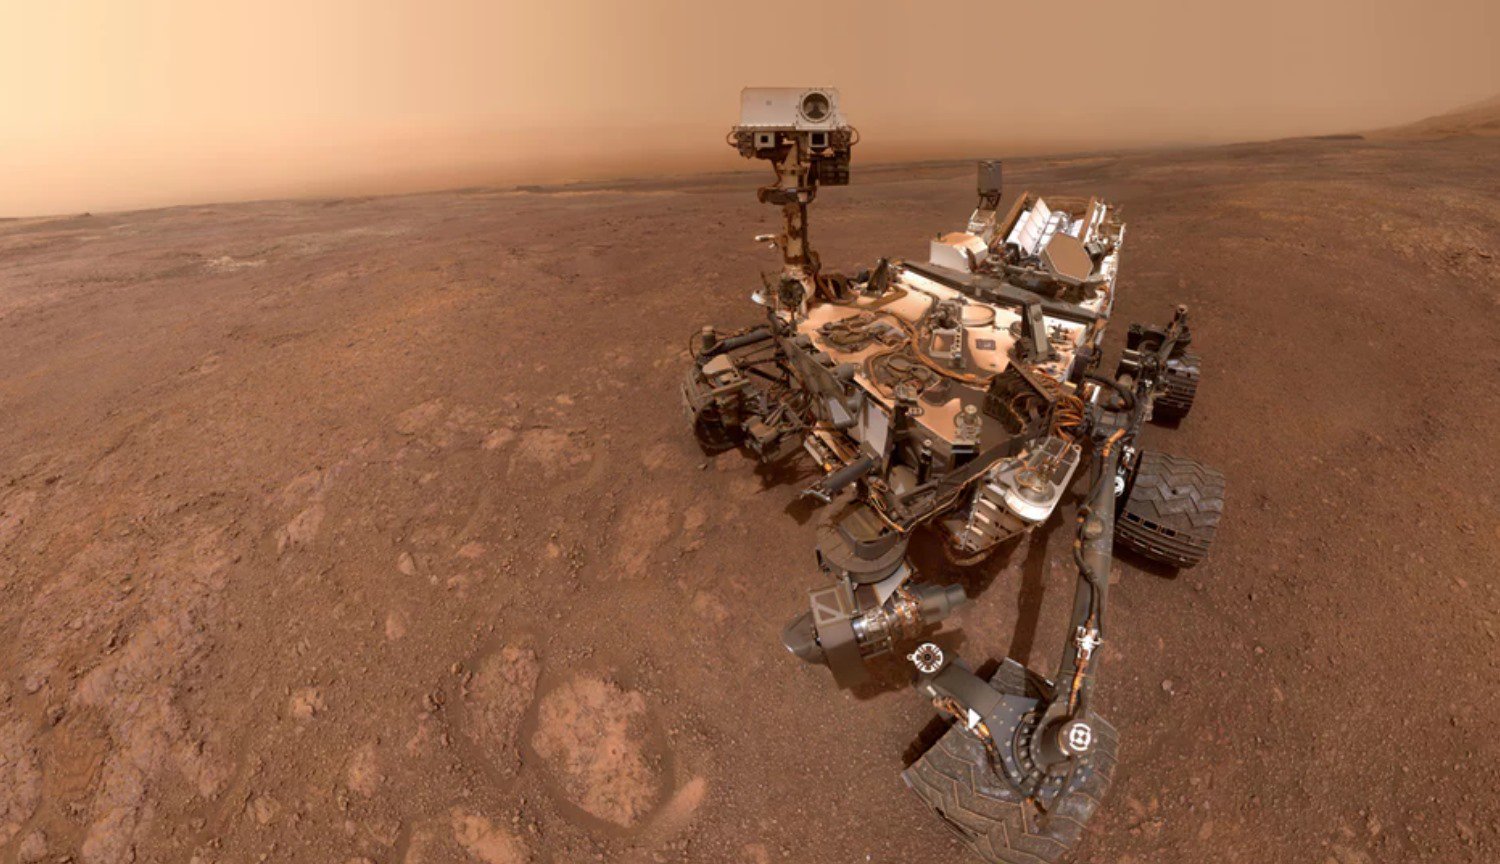 The Curiosity Rover made an important discovery with a simple tool